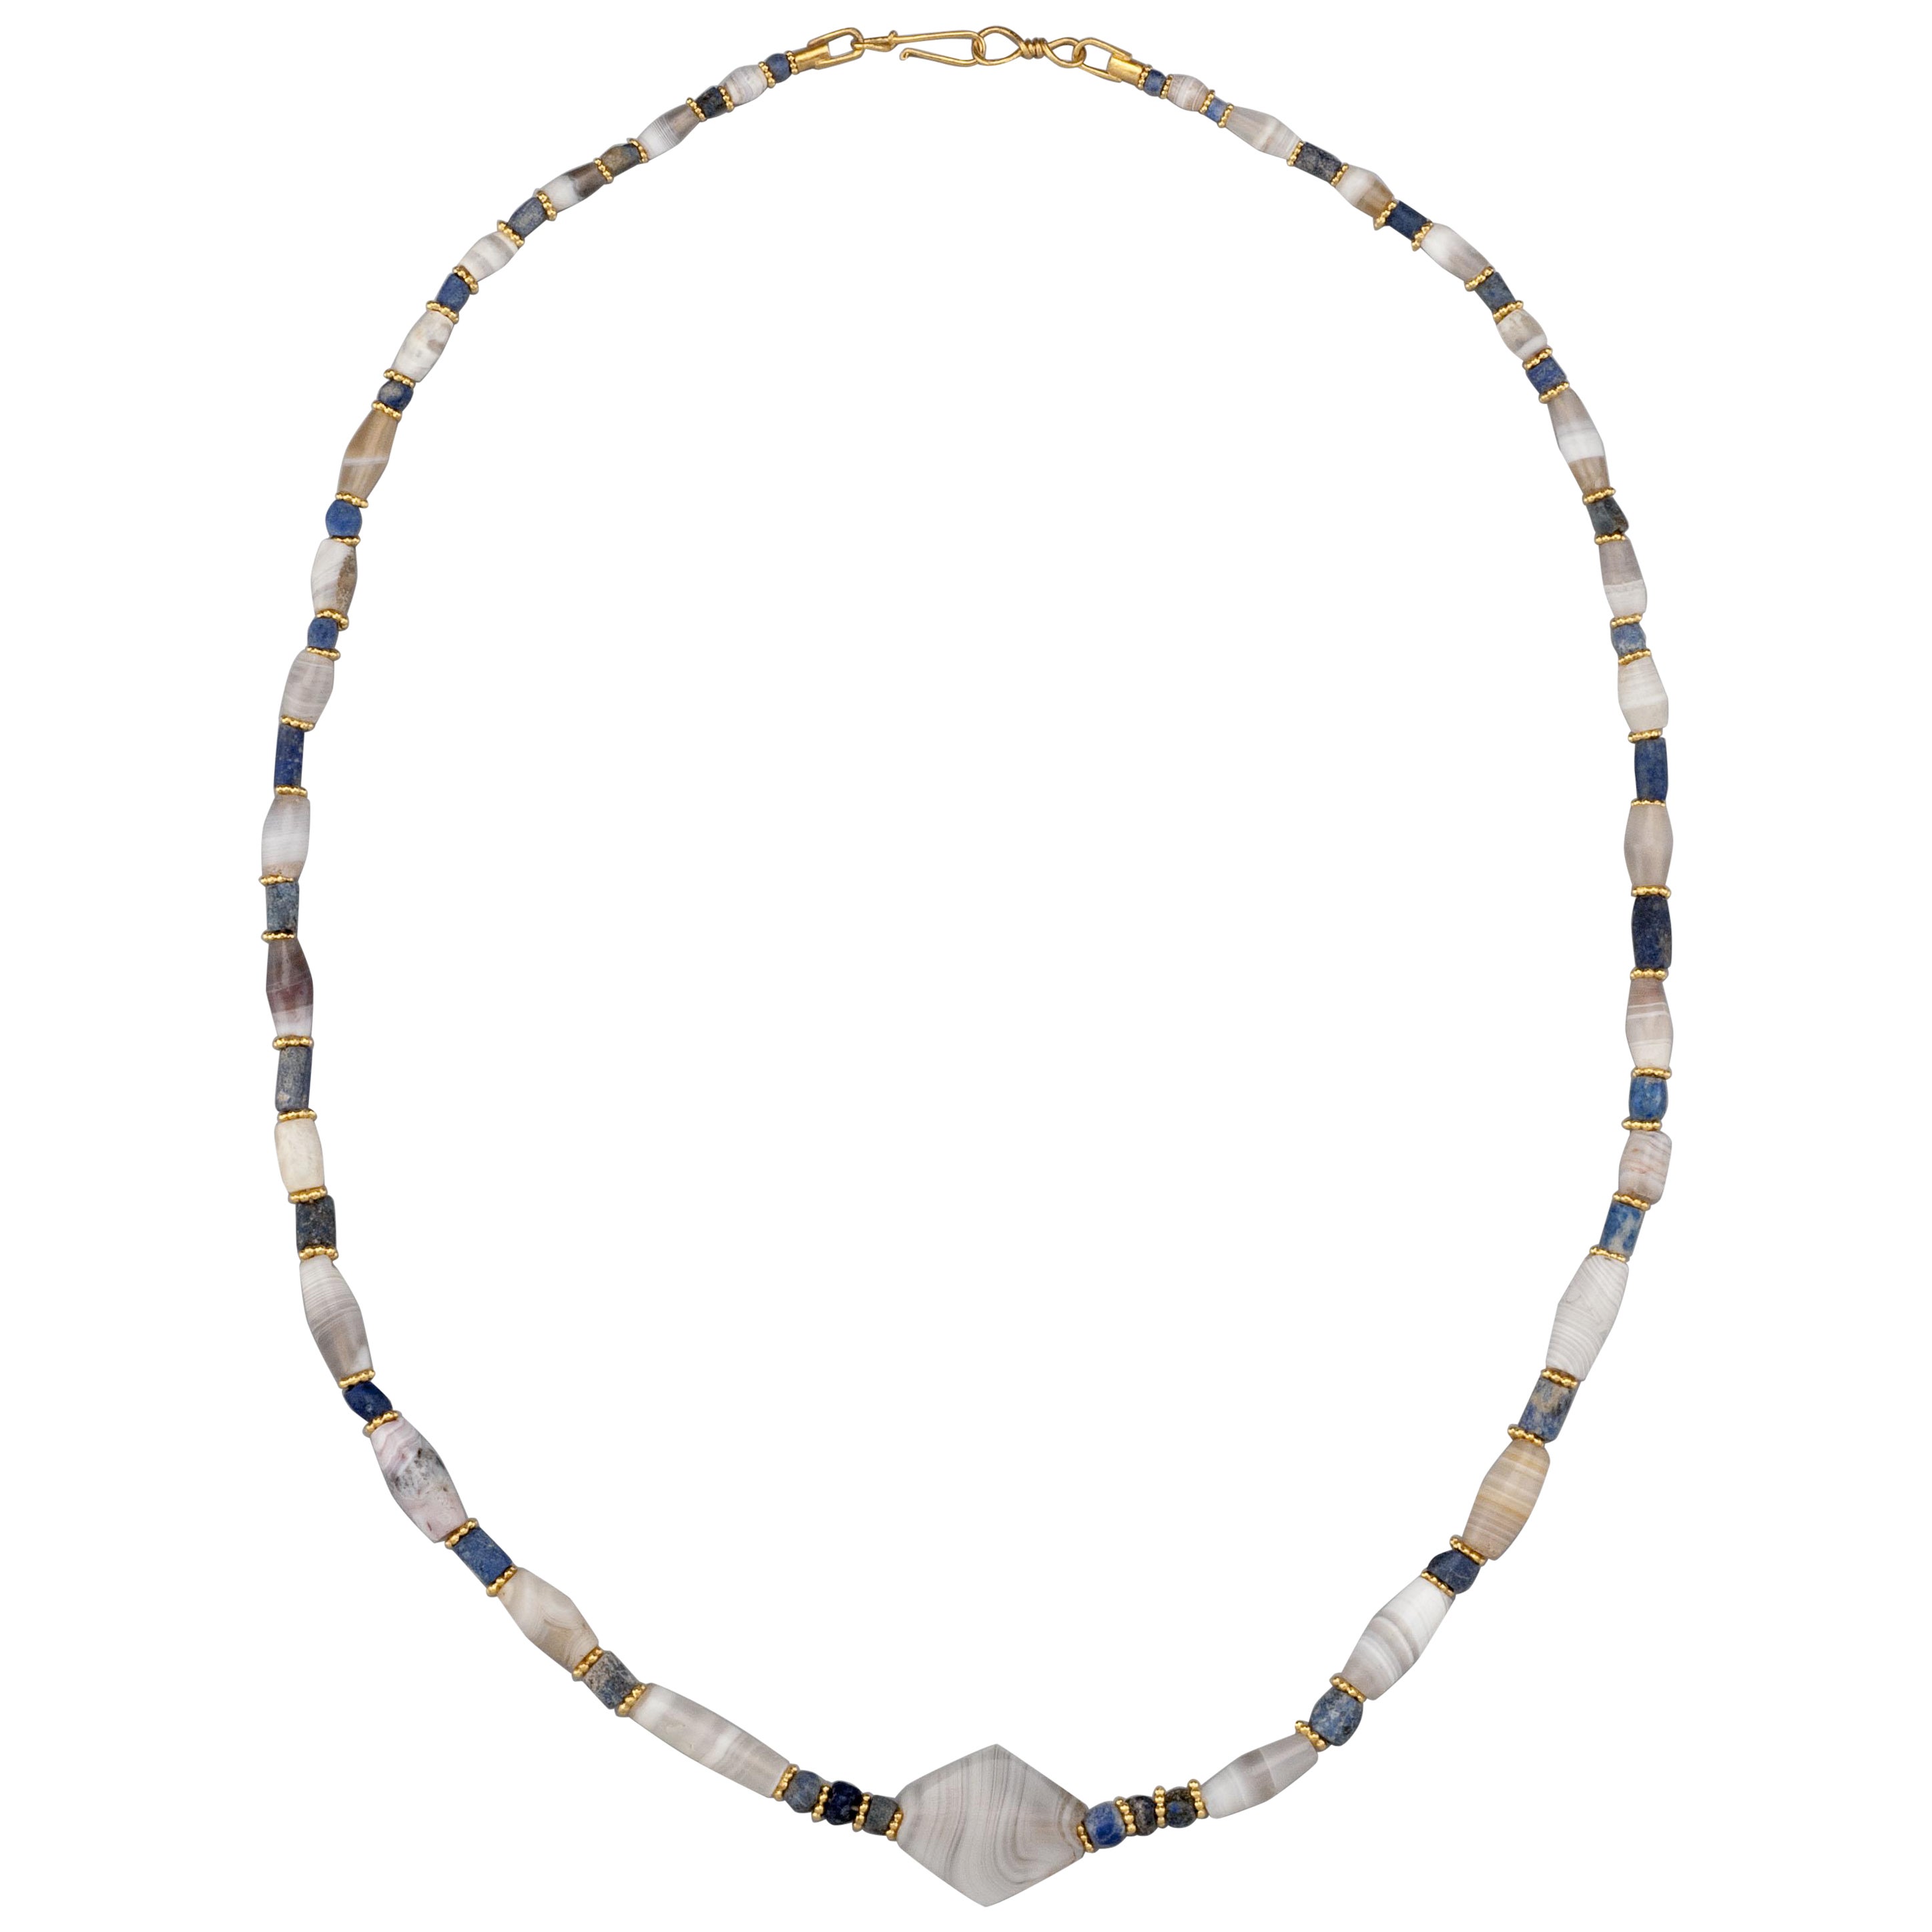 Ancient Chalcedony Barrel Beads, 20k Gold, and Lapis with Rhombus Center Bead For Sale